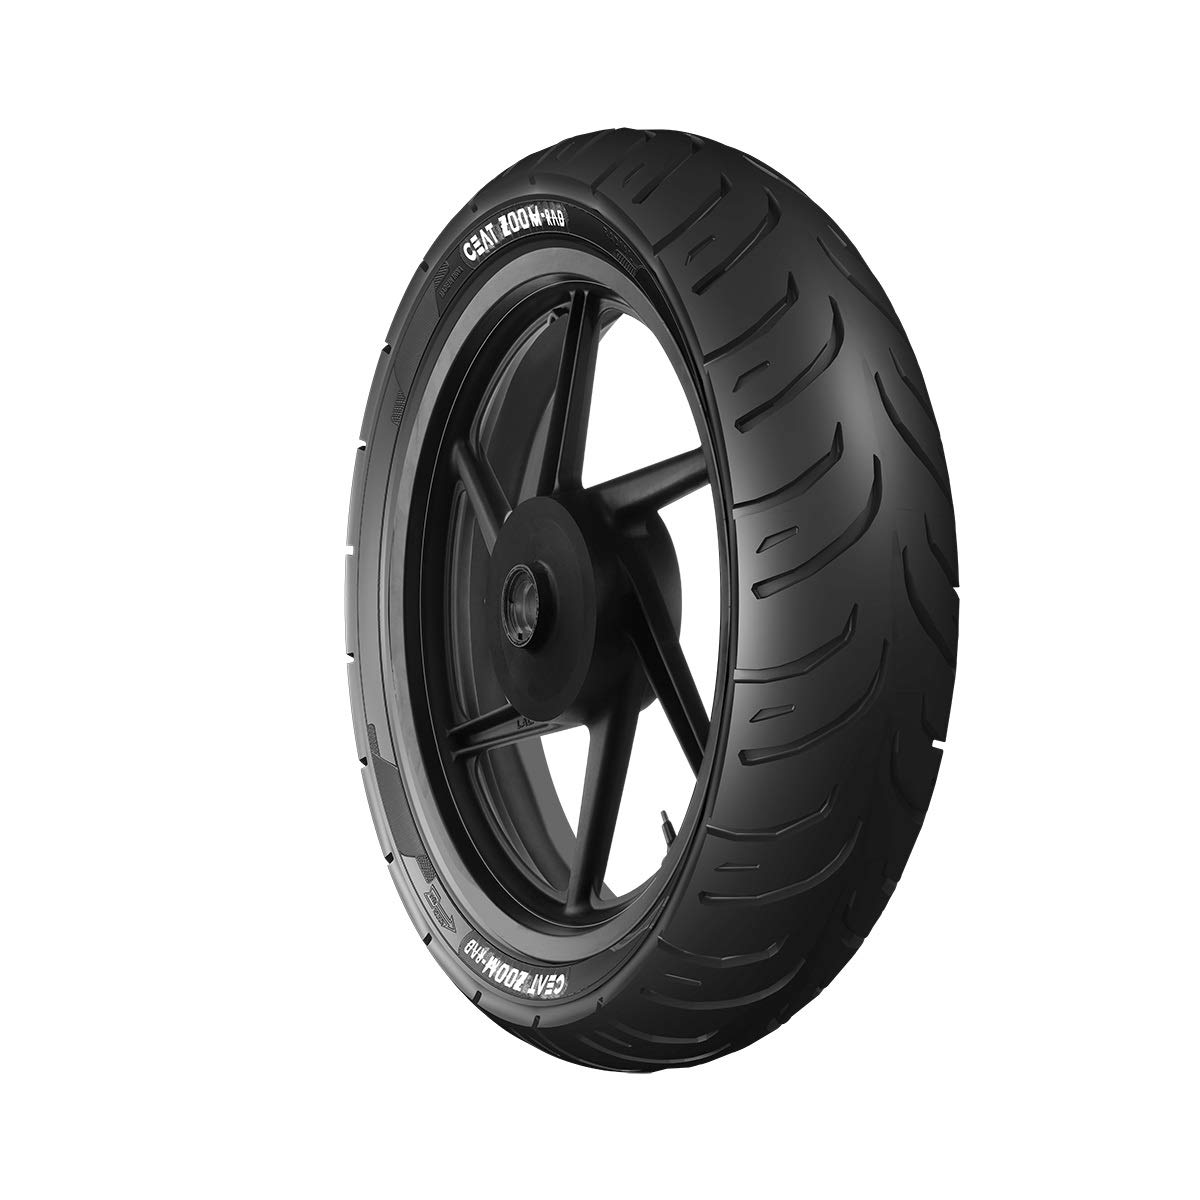 CEAT 140/60 R17 63P ZOOM-RAD Tubeless Tyre, Rear ((All India Shipping and Home Delivery Free)